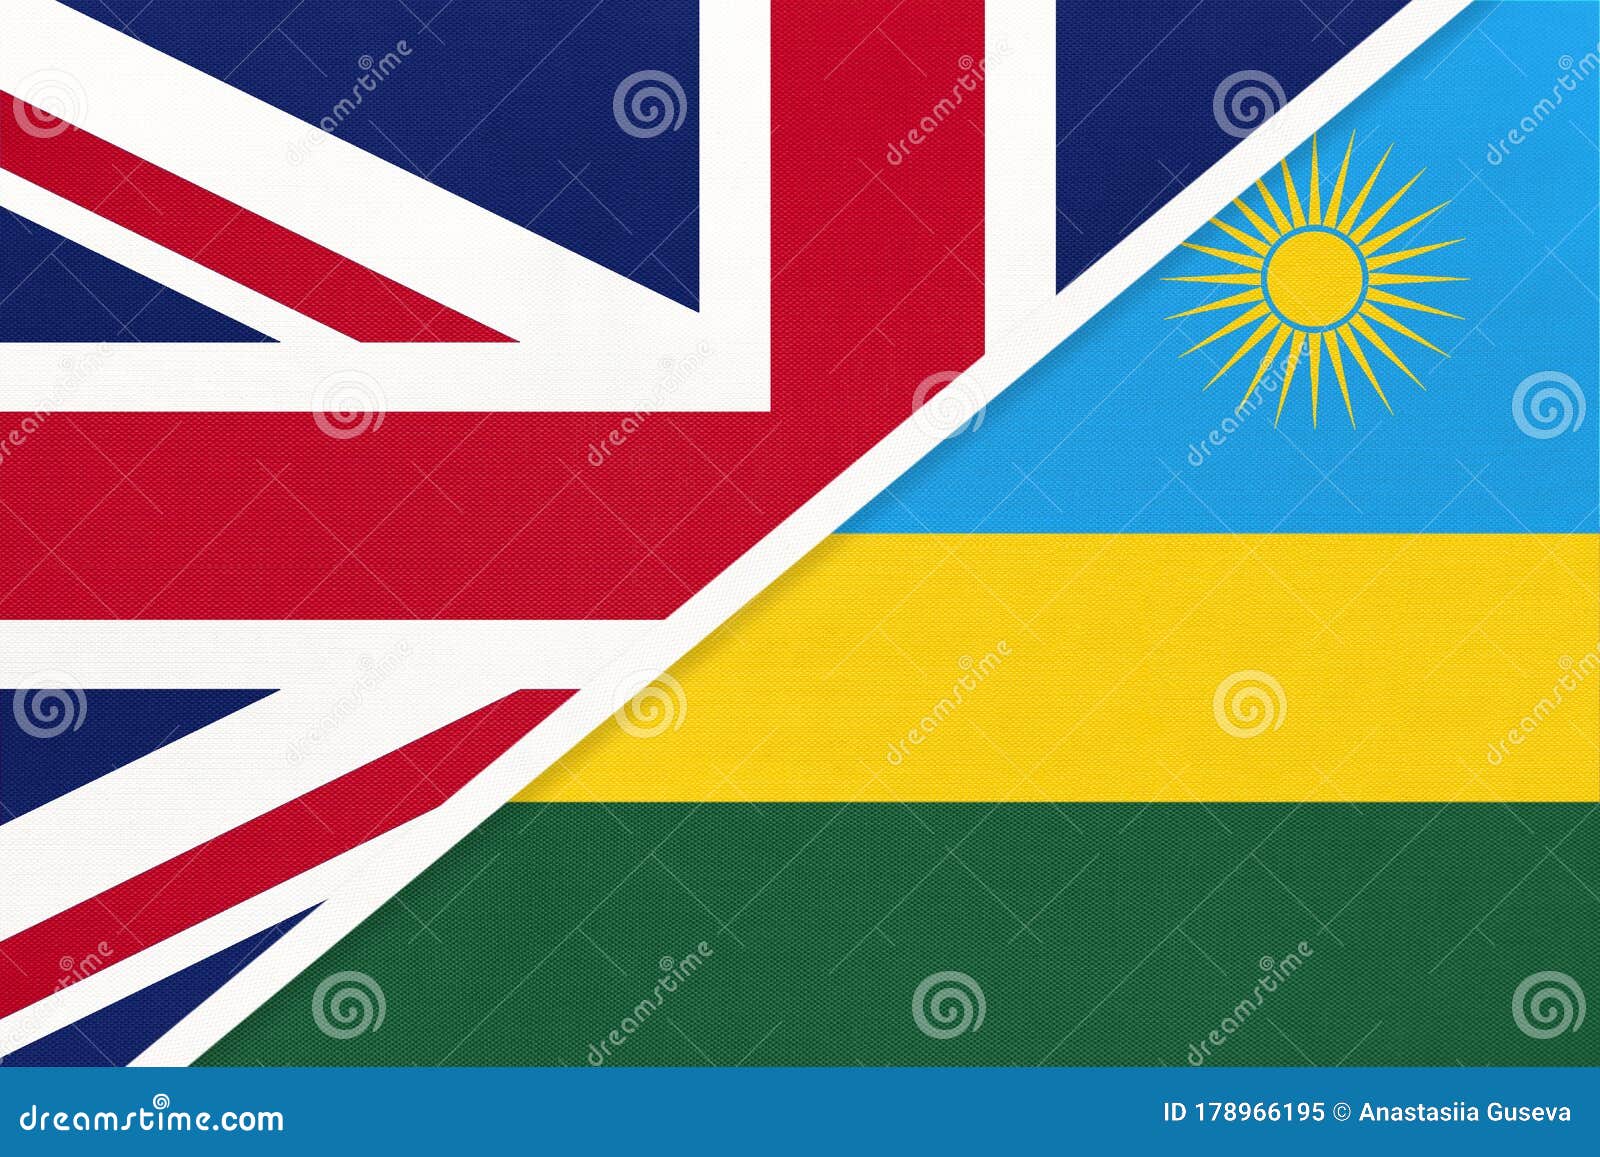 united kingdom vs rwanda national flag from textile. relationship between two european and african countries